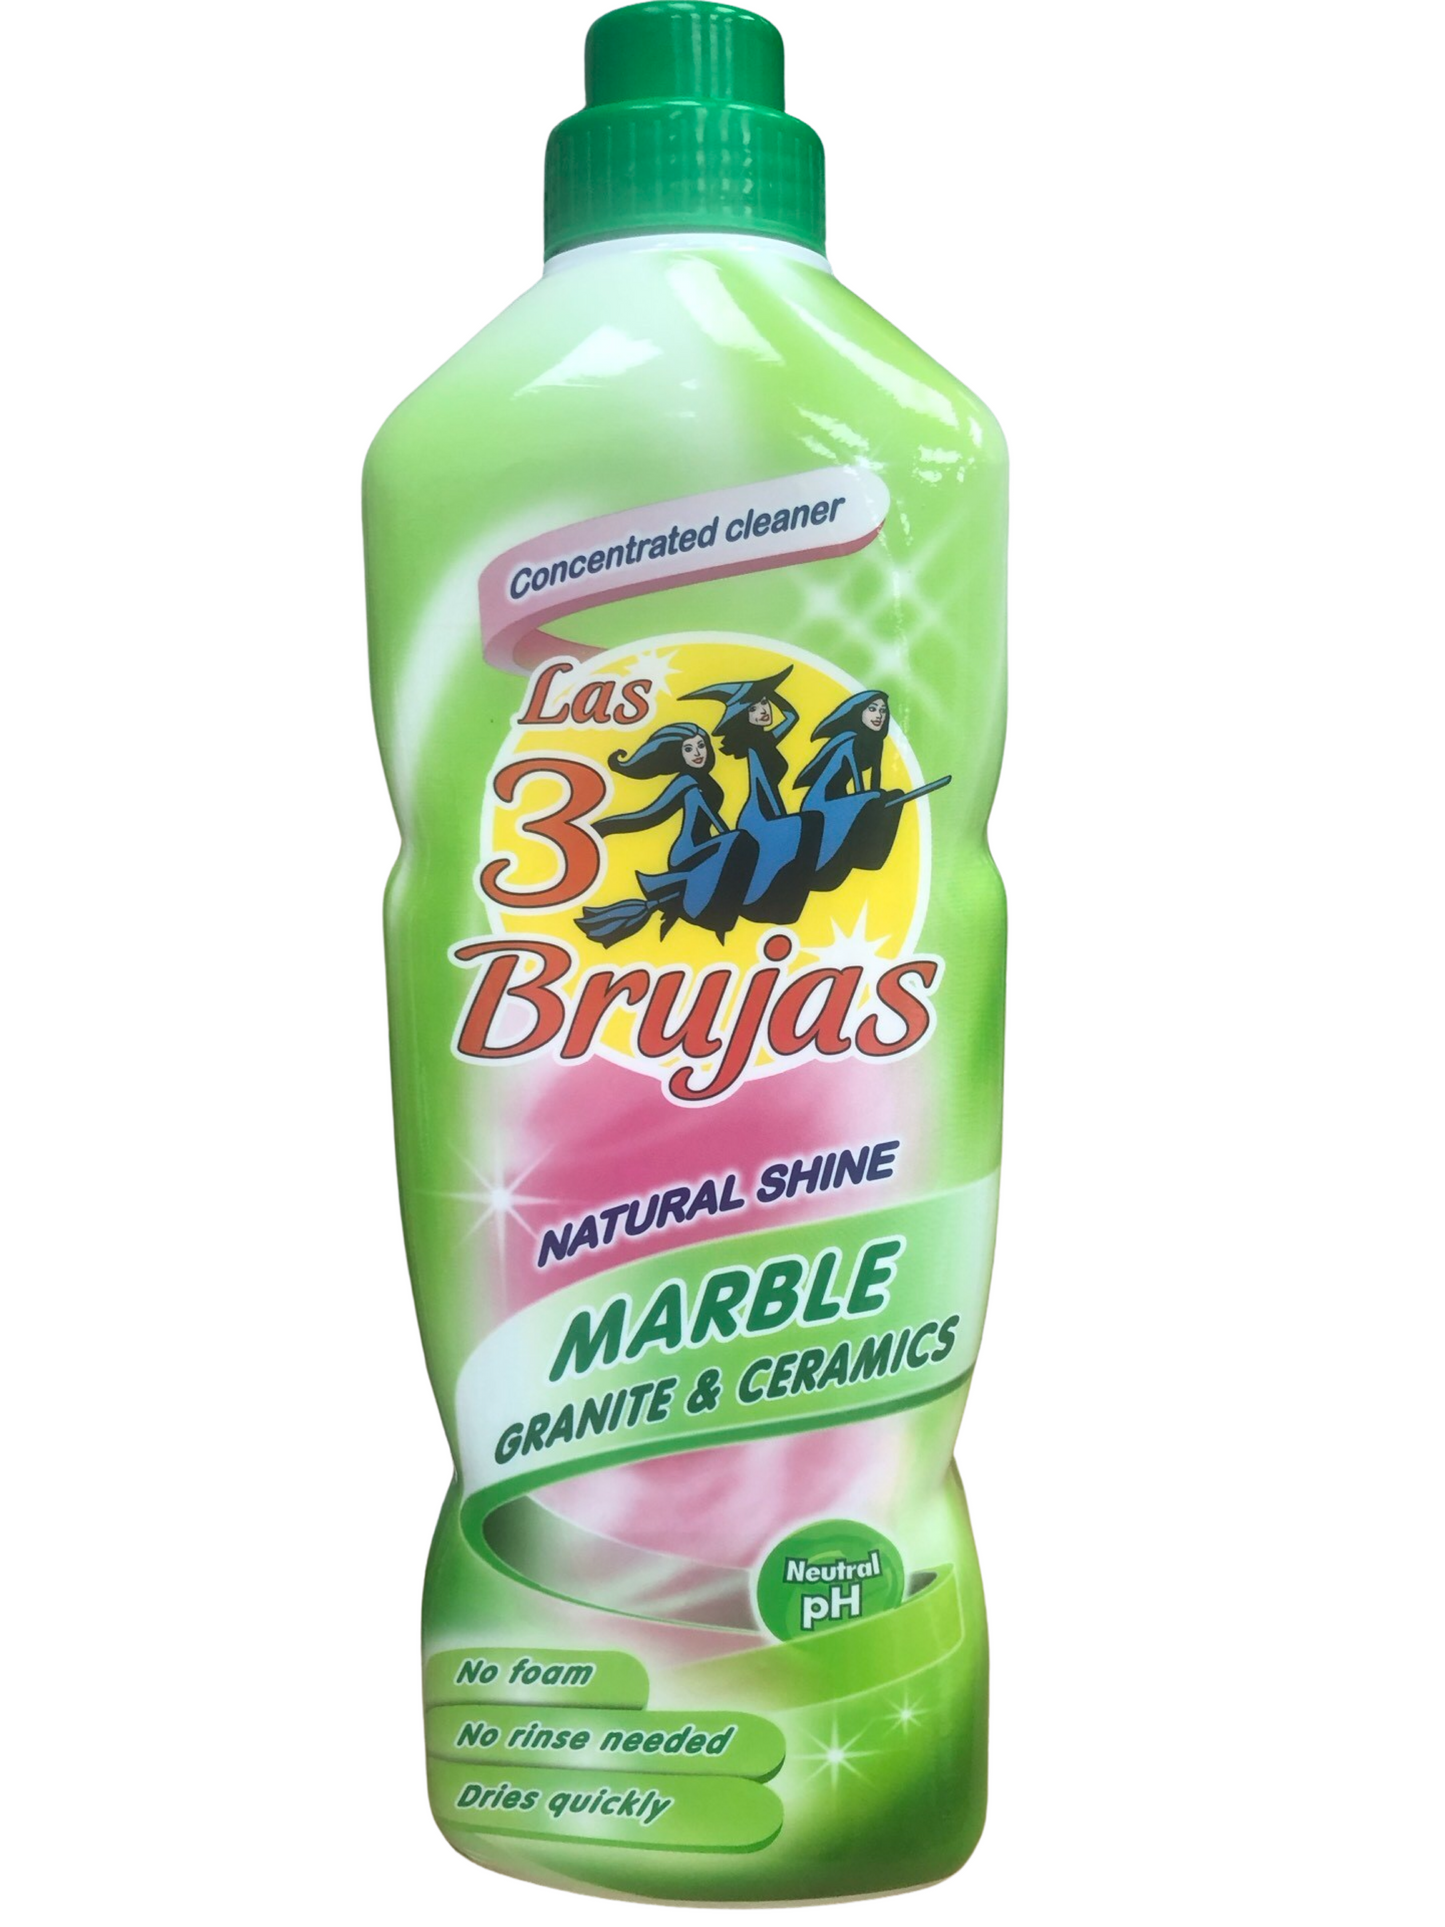 3 Brujas / 3 Witches Marble Granite Ceramic Cleaner 1 litre